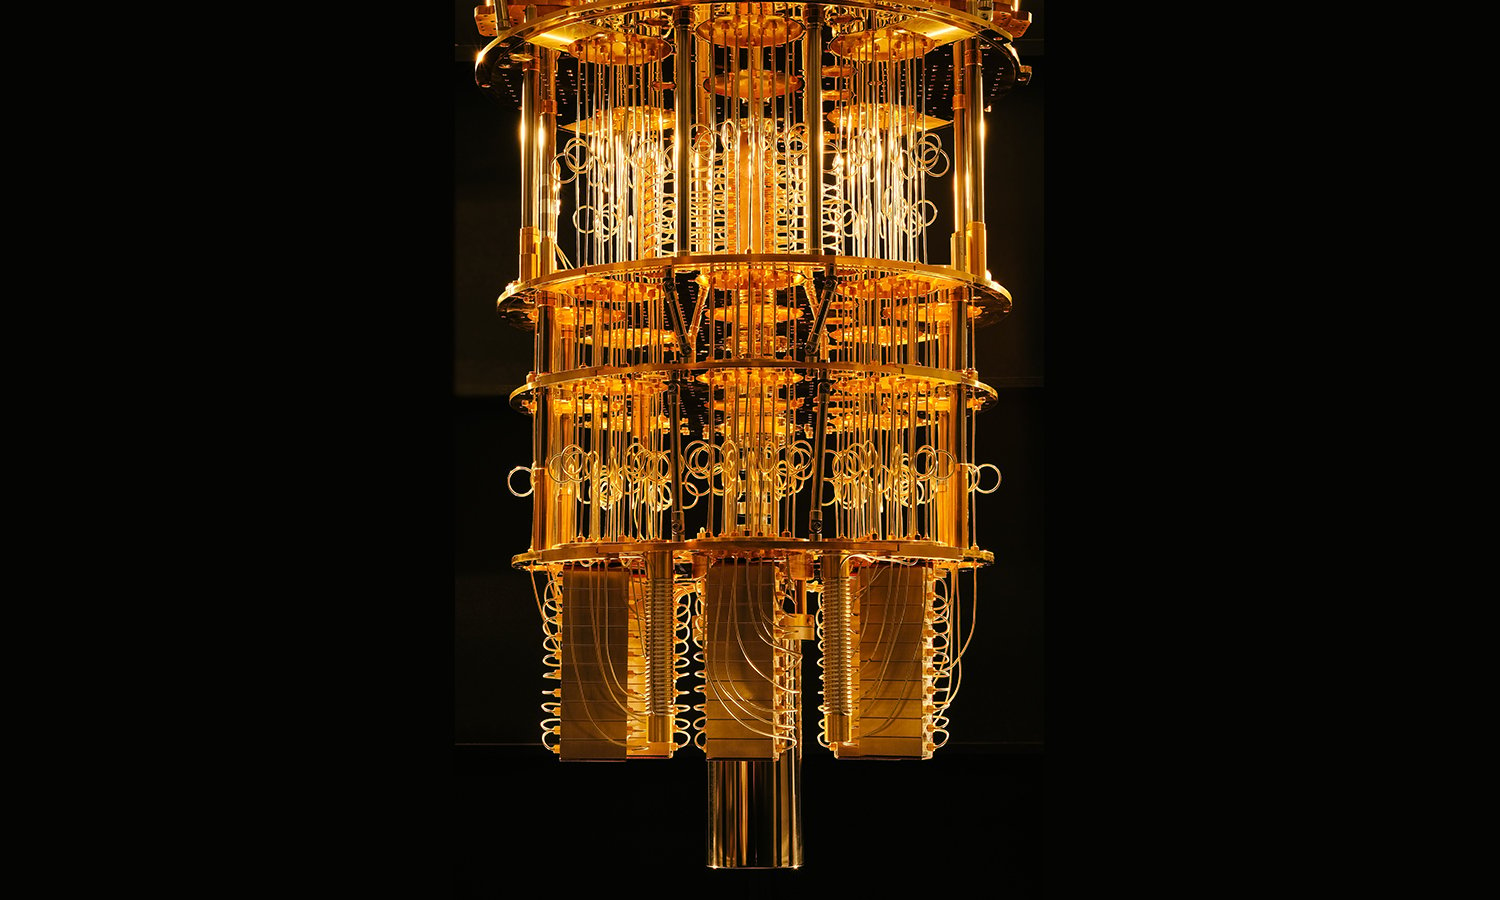 As a quantum computer can be in many states at the time it enables the calculation of many possibilities at once, says Dr Thomas Monz. Image credit - Flickr/IBM Research, licensed under CC BY-ND 2.0